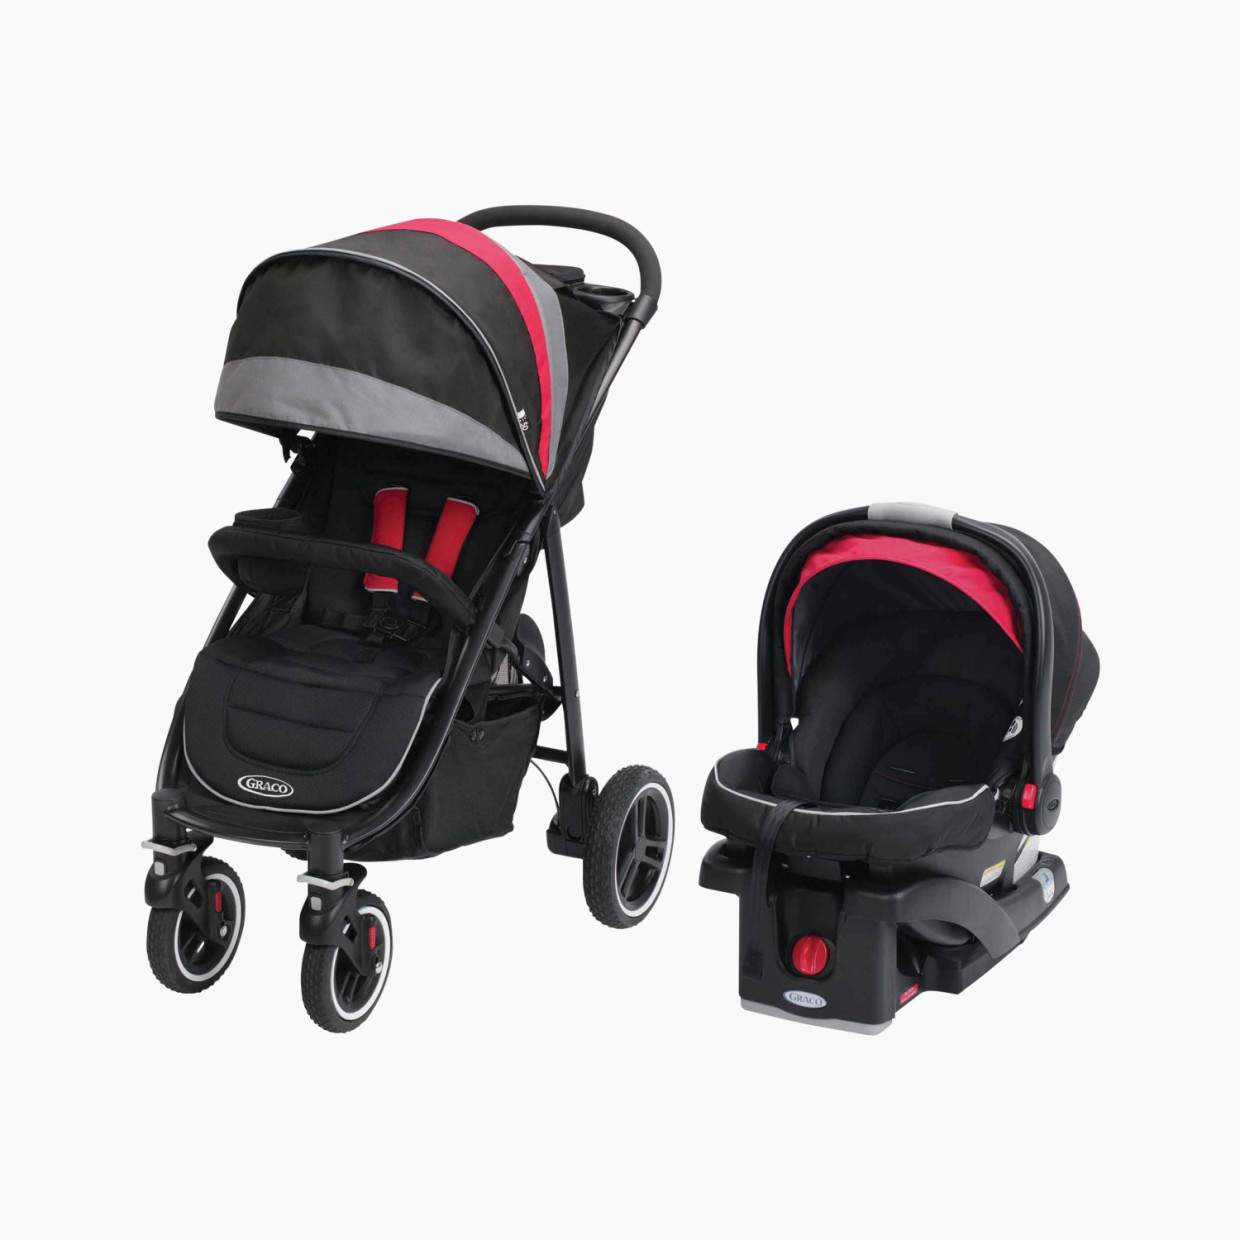 Graco Aire 4 XT Travel System - Marco.